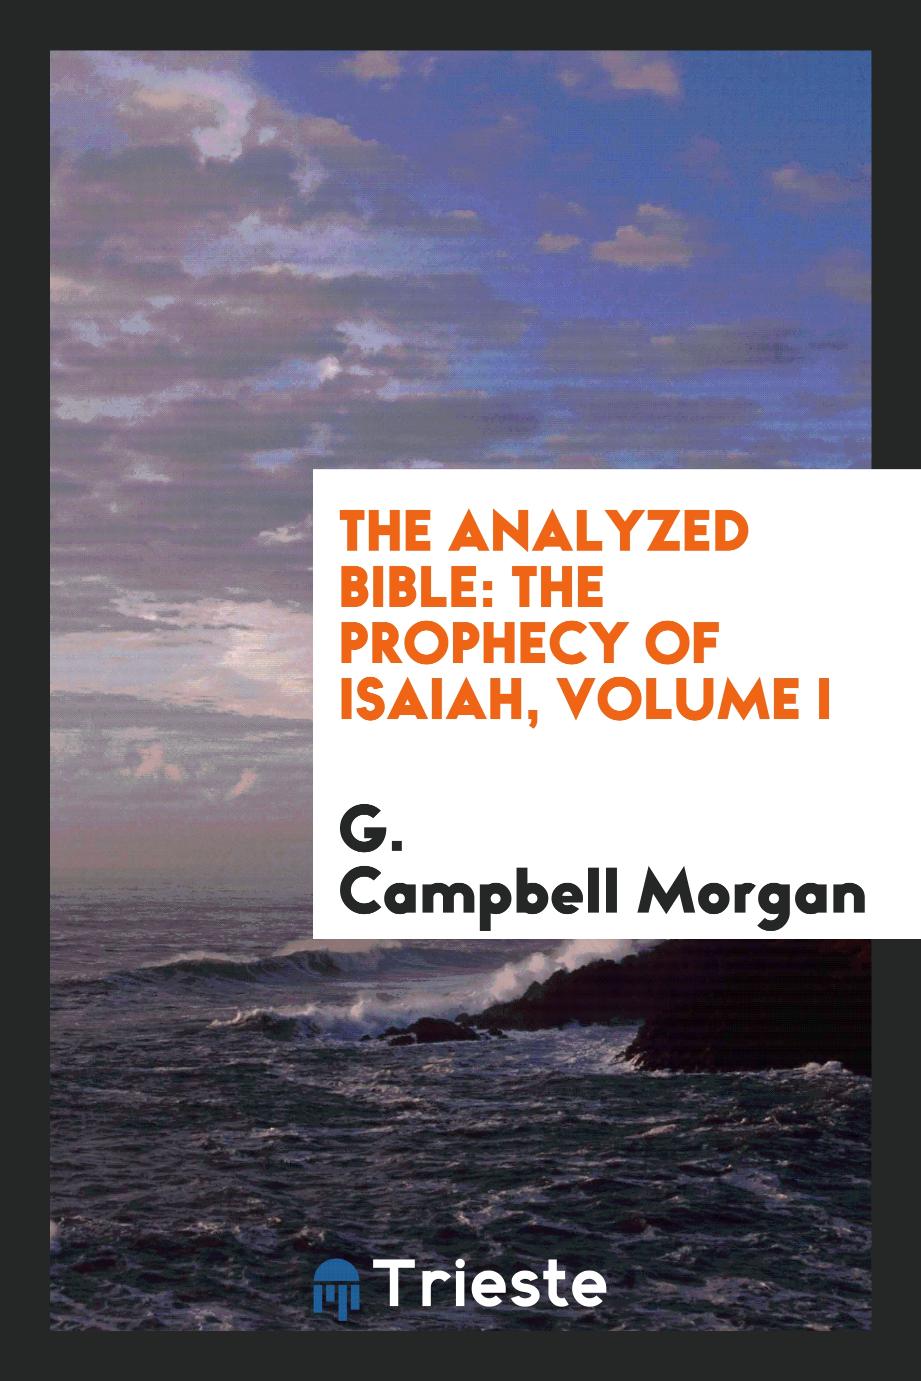 The Analyzed Bible: The Prophecy of Isaiah, Volume I